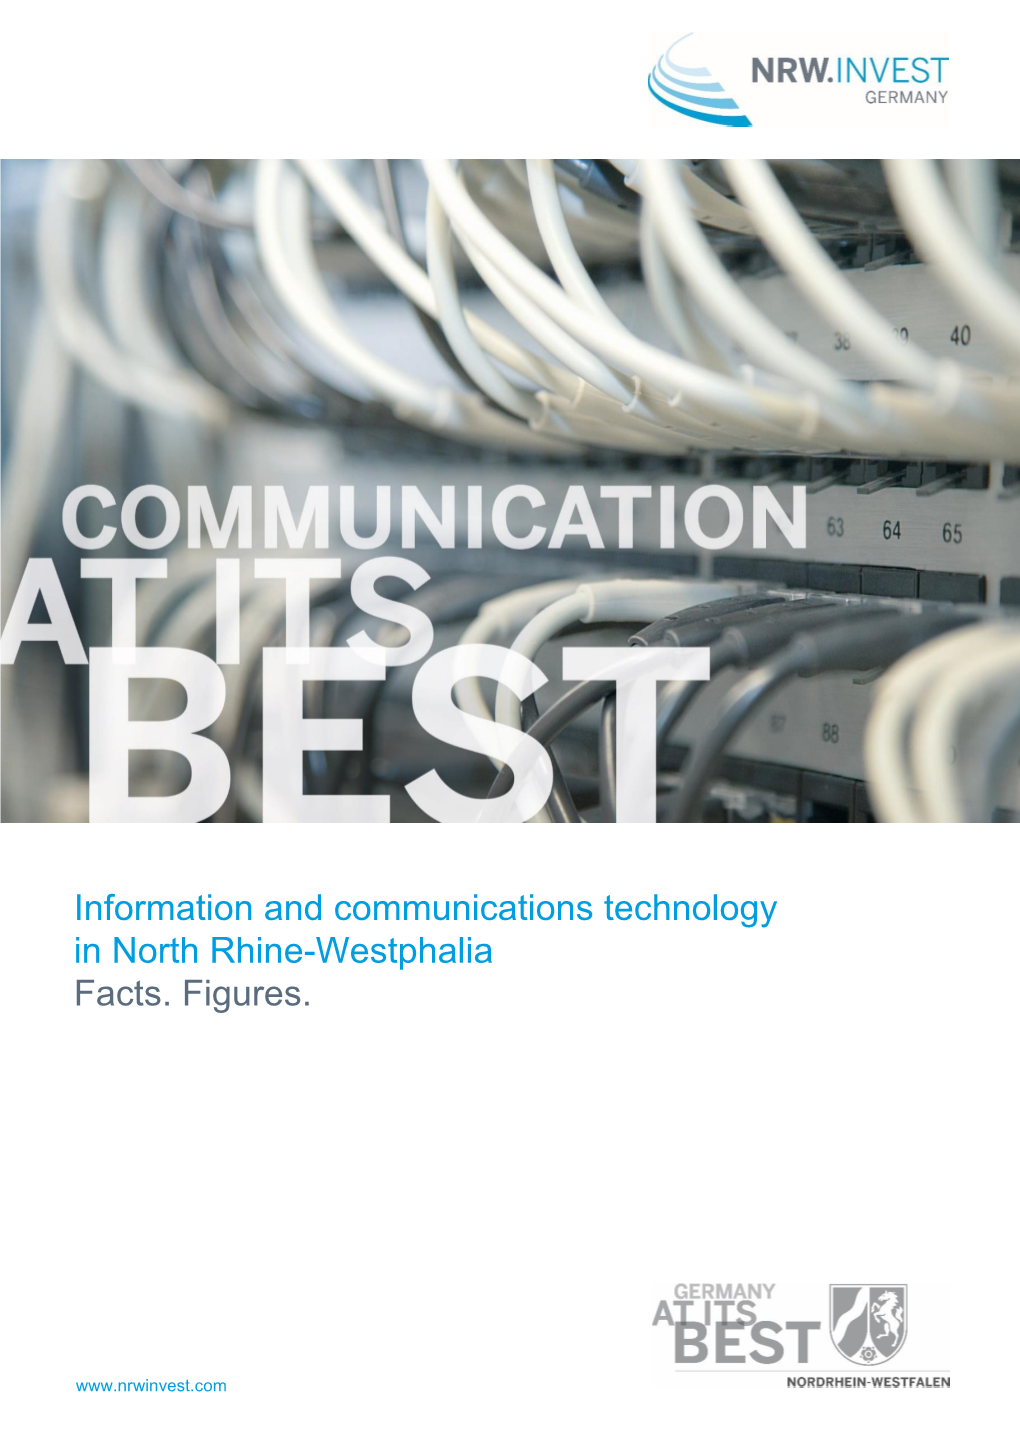 Information and Communications Technology in North Rhine-Westphalia Facts